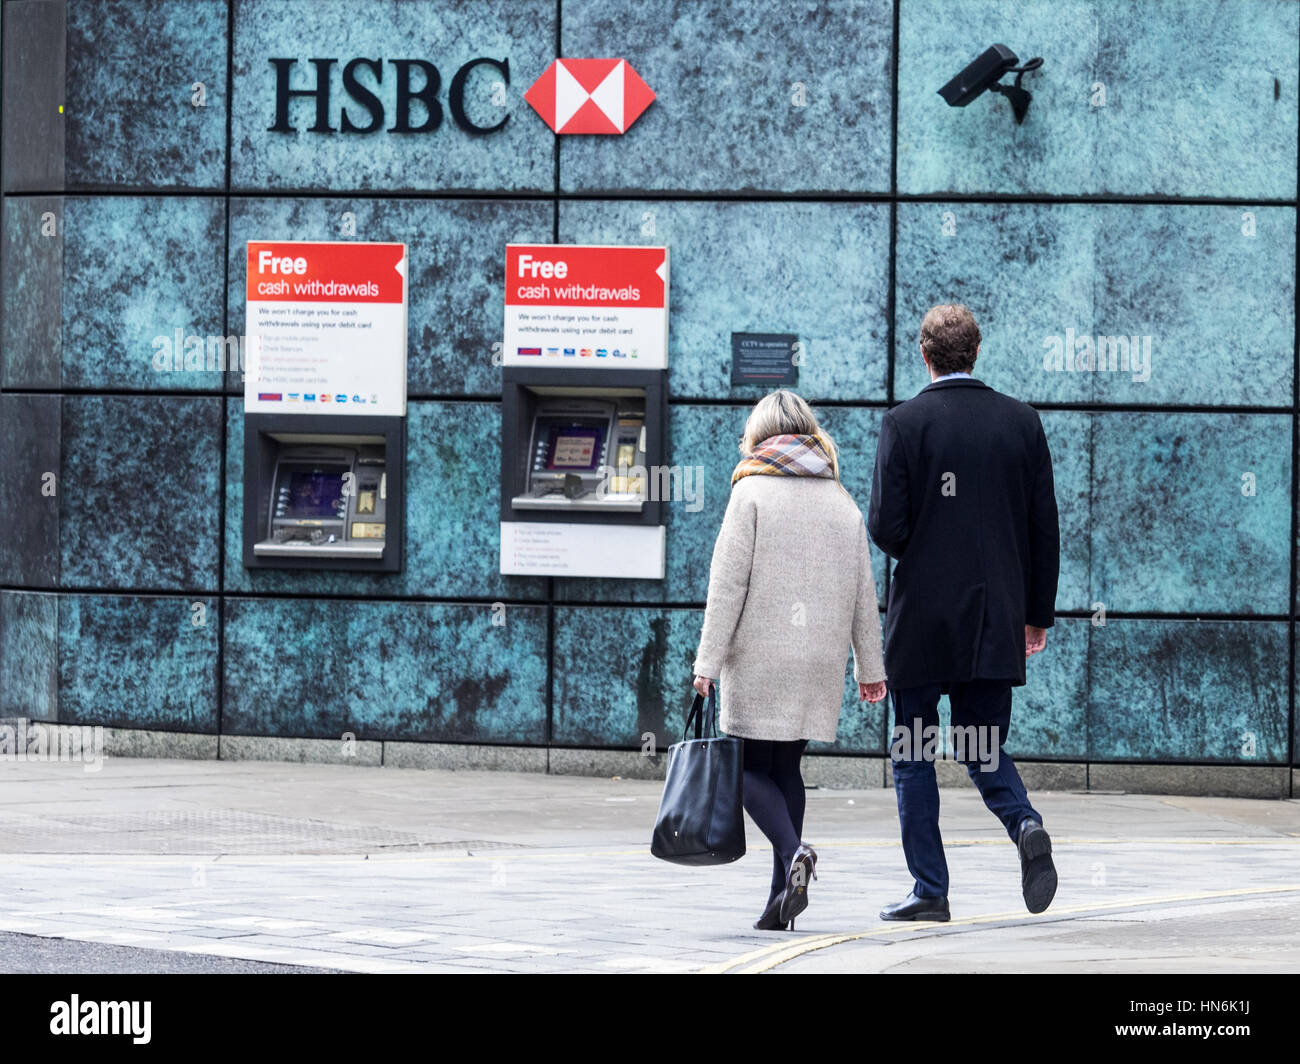 Bank Cash Machines - HSBC Cash Machines London - A couple walk towards HSBC cash machines in Central London with security cameras monitoring the ATMs. Stock Photo